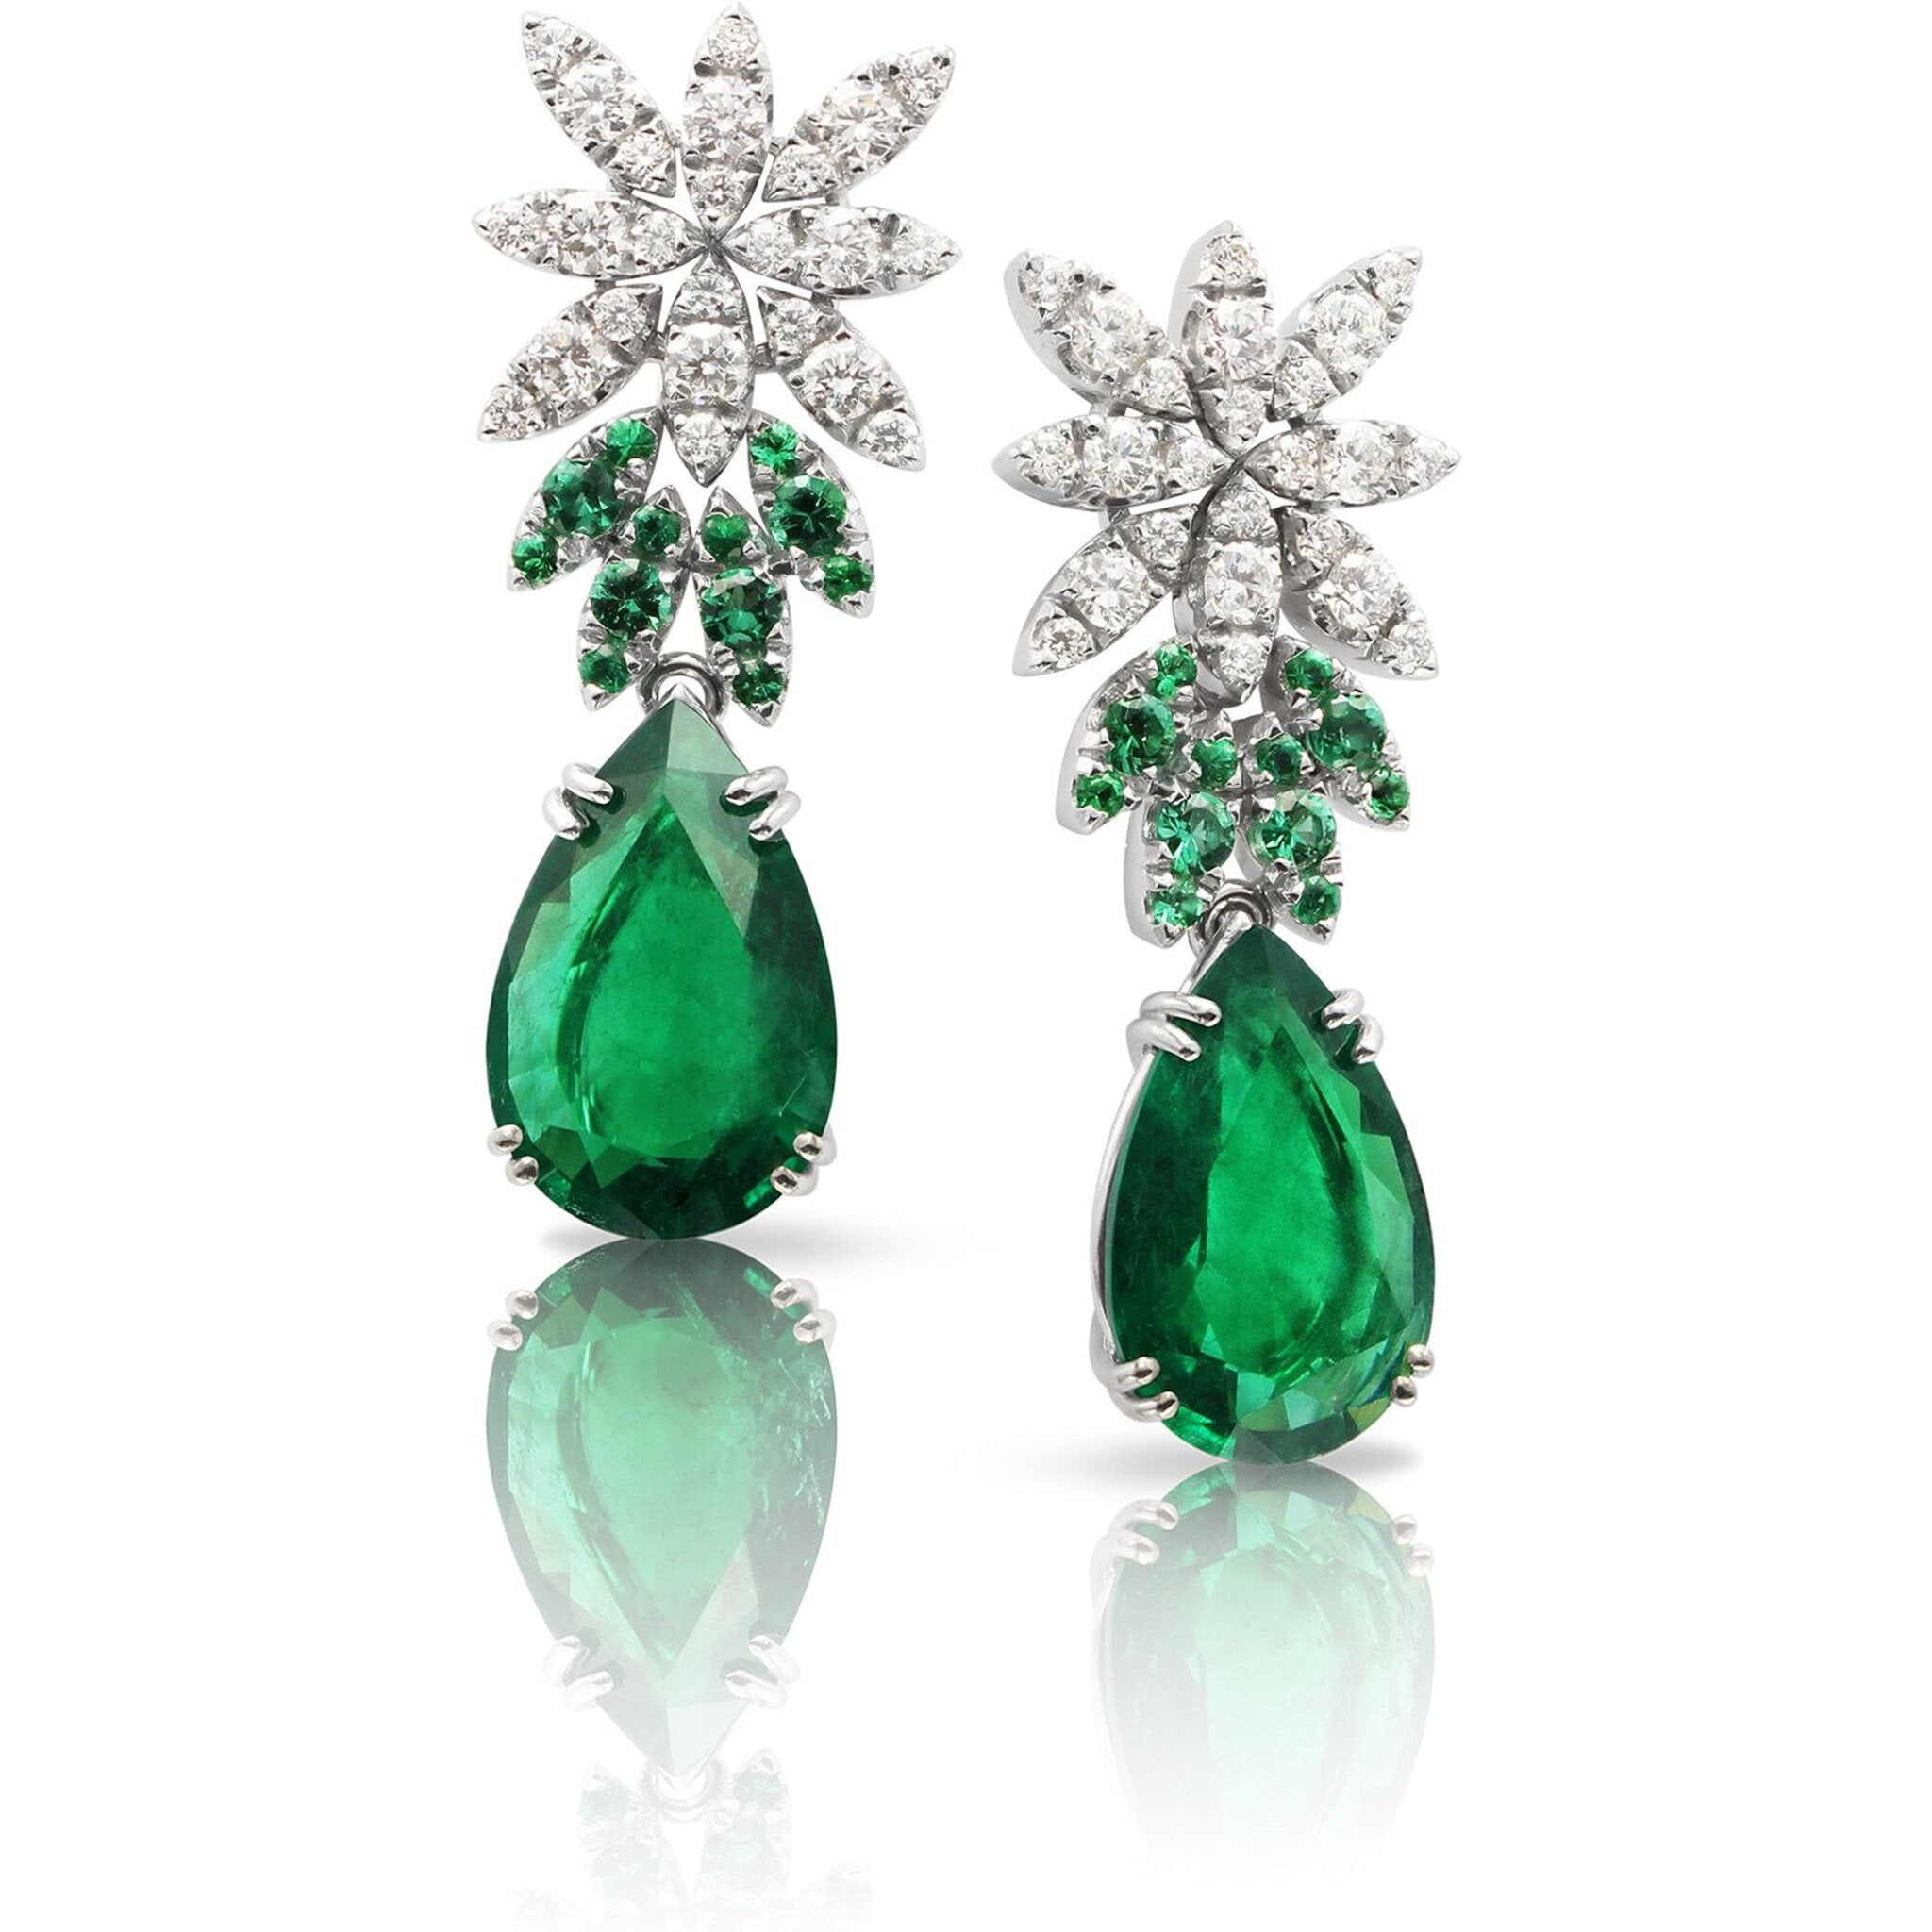 Pasquale Bruni  - 18k White Gold Ghirlanda Haute Couture Earrings with Emeralds and Diamonds